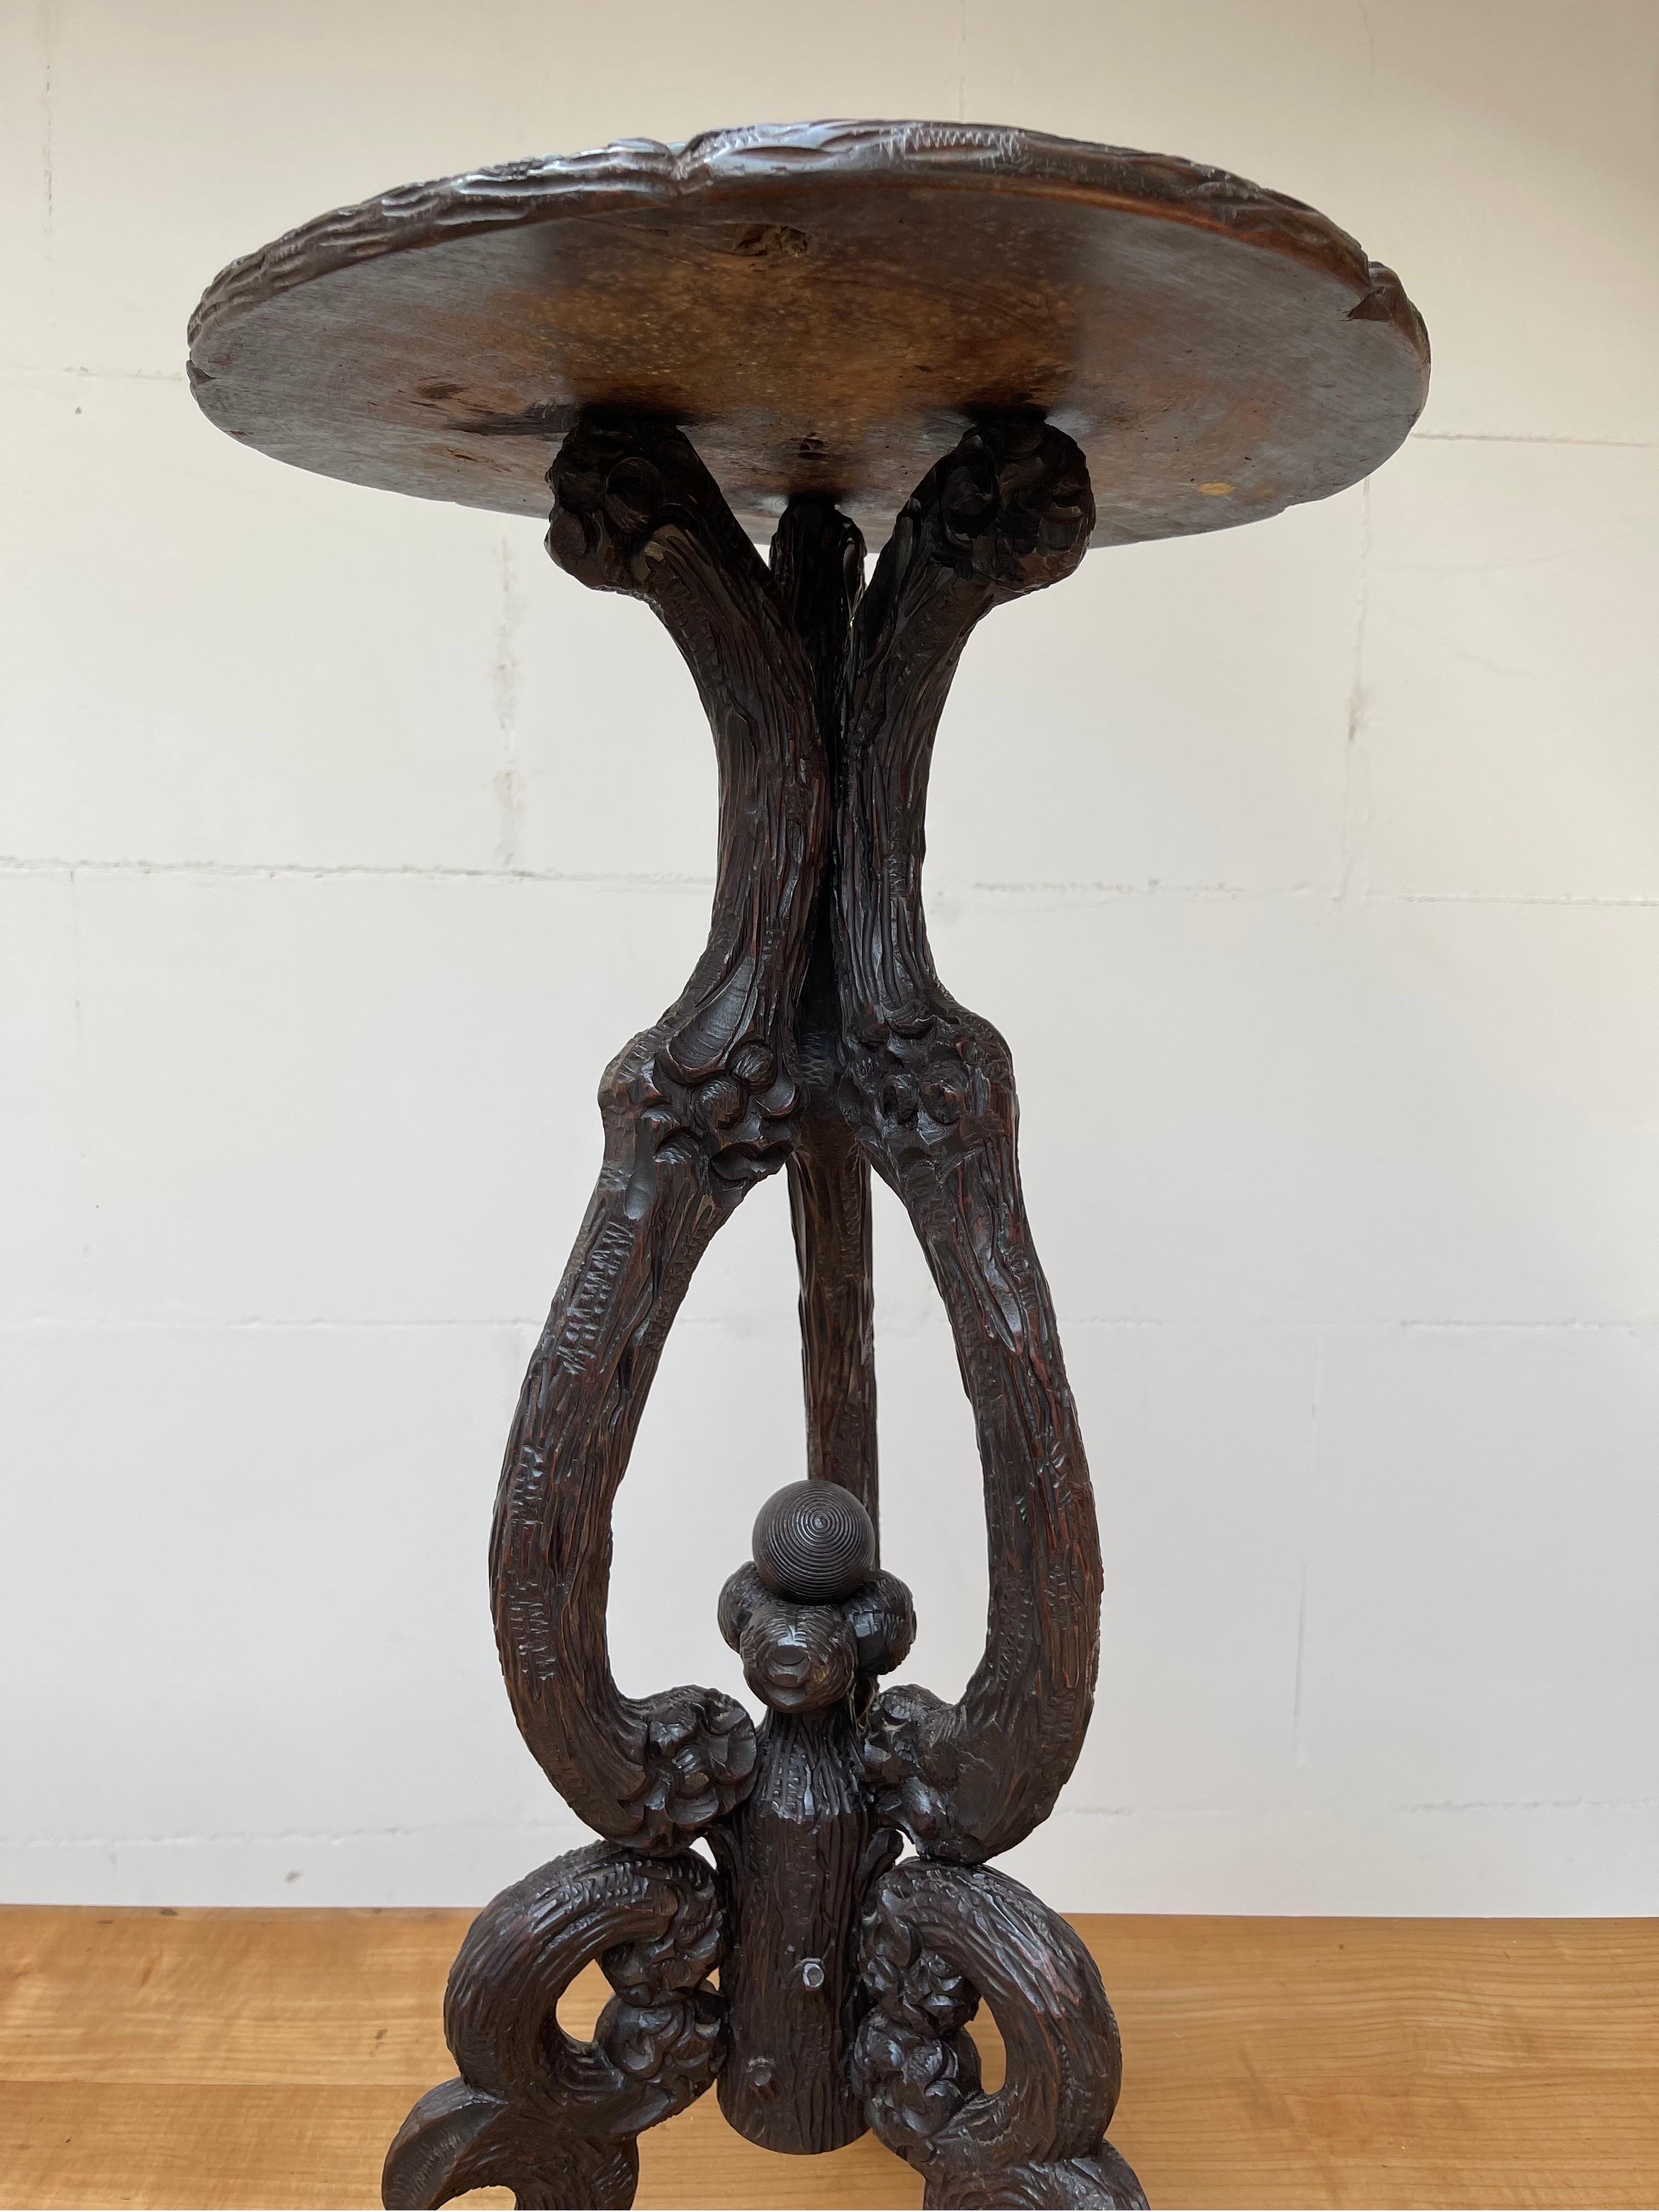 Rare, meaningful, practical, handcrafted and highly decorative antique table.

This one of a kind table will appeal to spiritual people and collectors of stylish, rare and meaningful antiques from all walks of life and from many countries accross